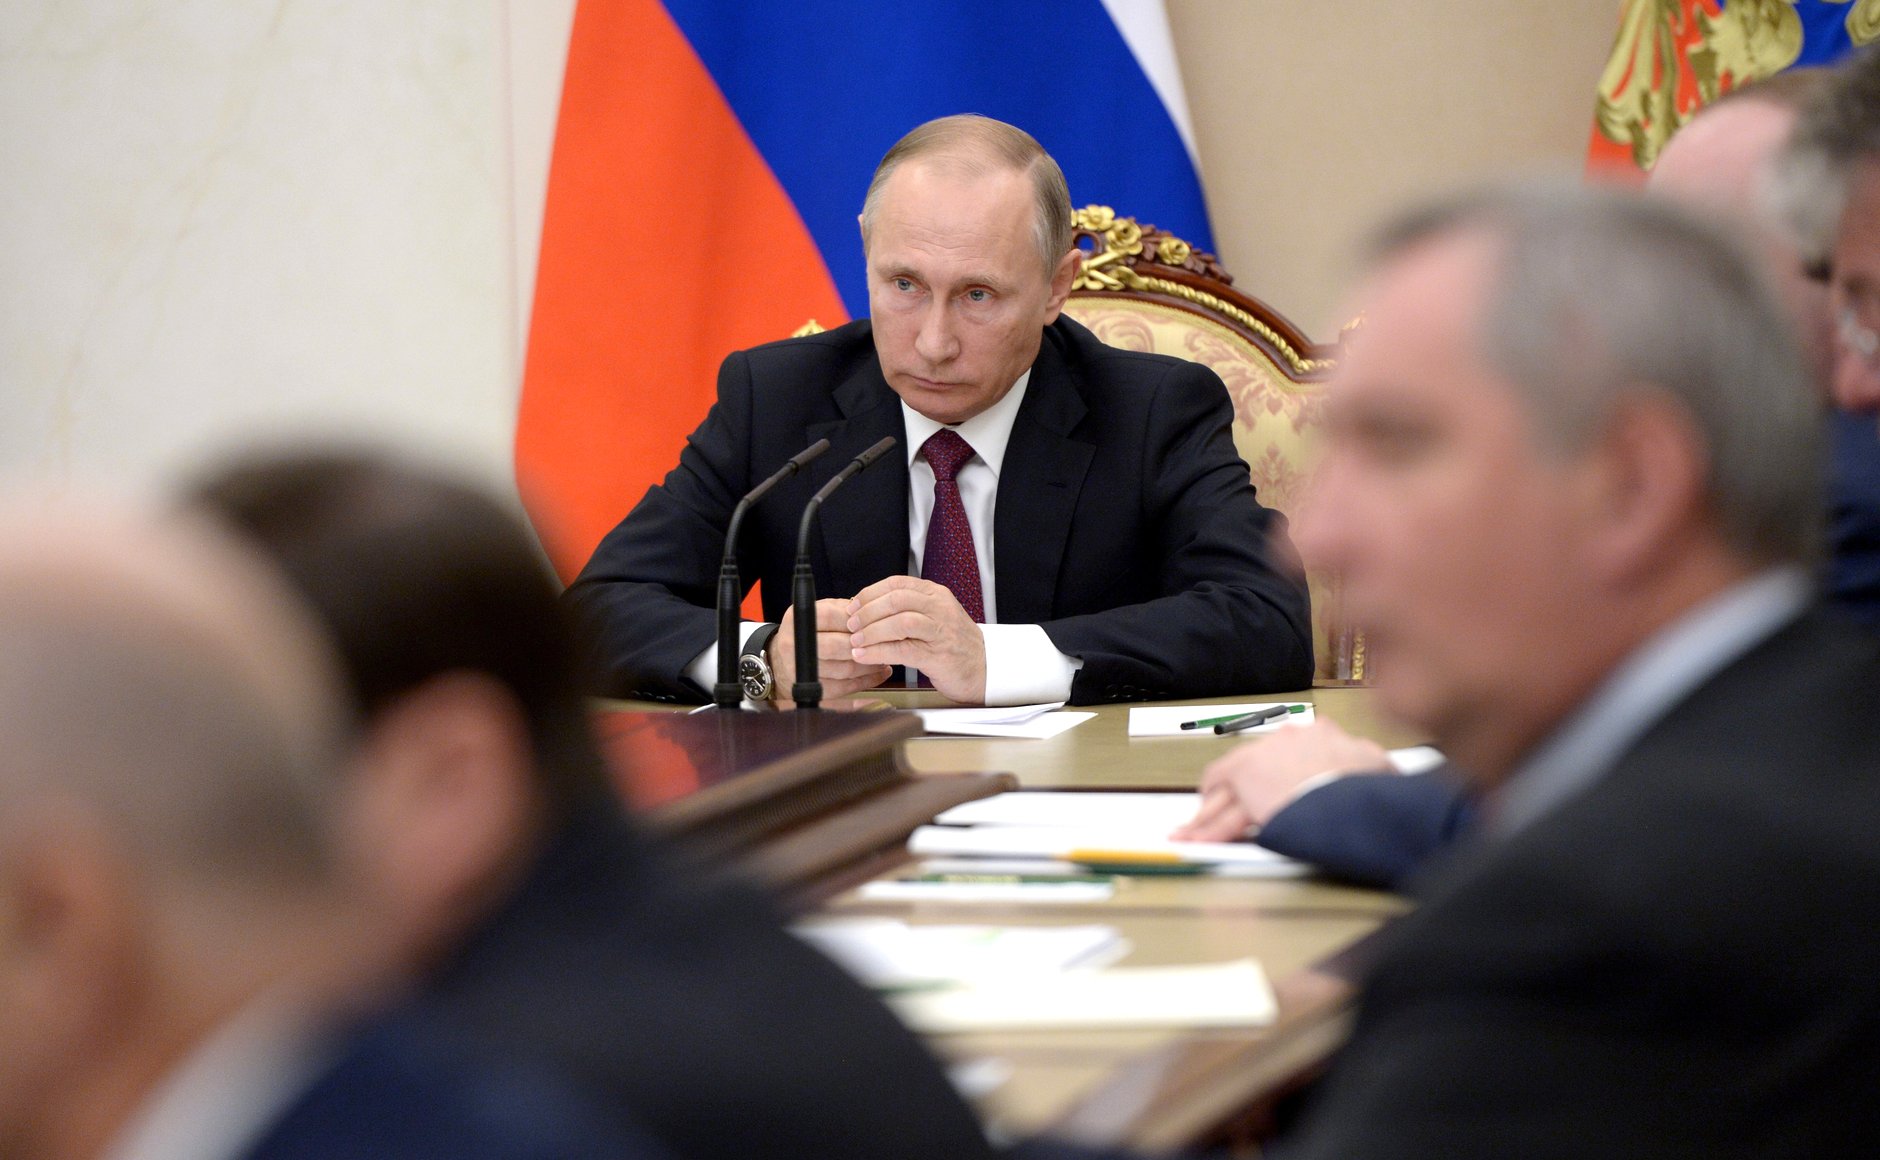 Putin: Interesting sports facts surfaced after WADA’s database was hacked